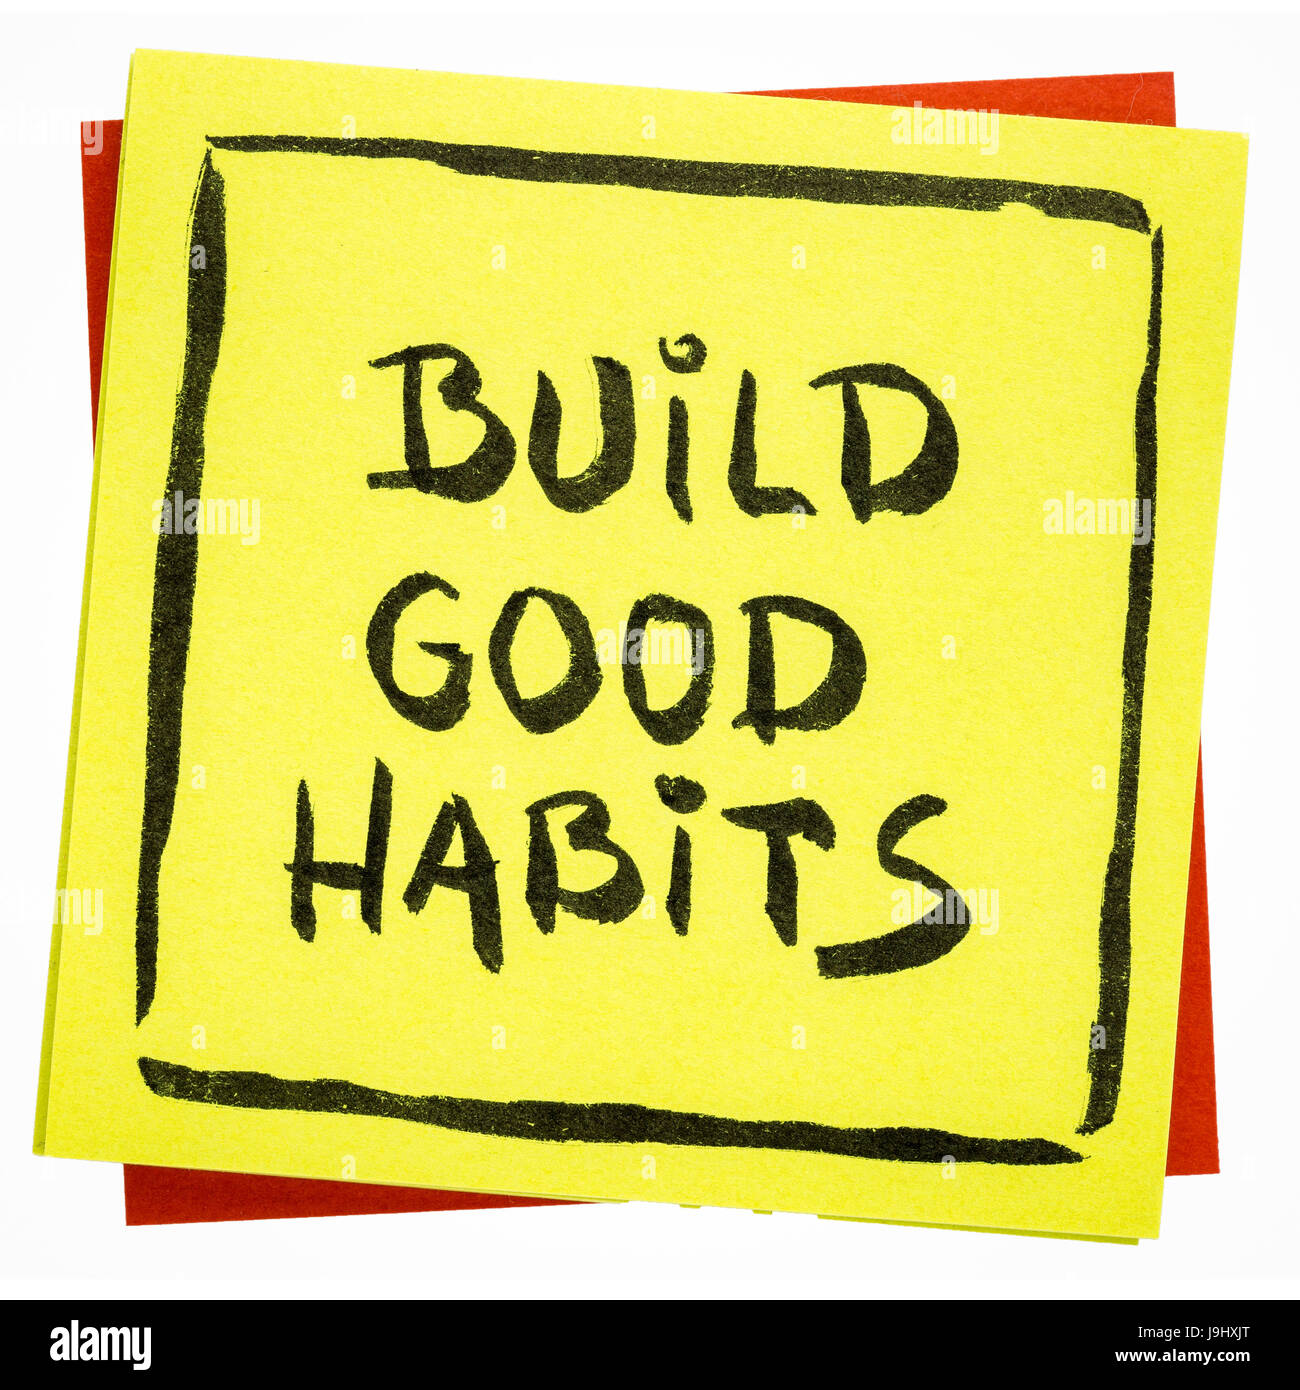 Build good habits inspirational advice or  reminder - handwriting on an isolated sticky note Stock Photo